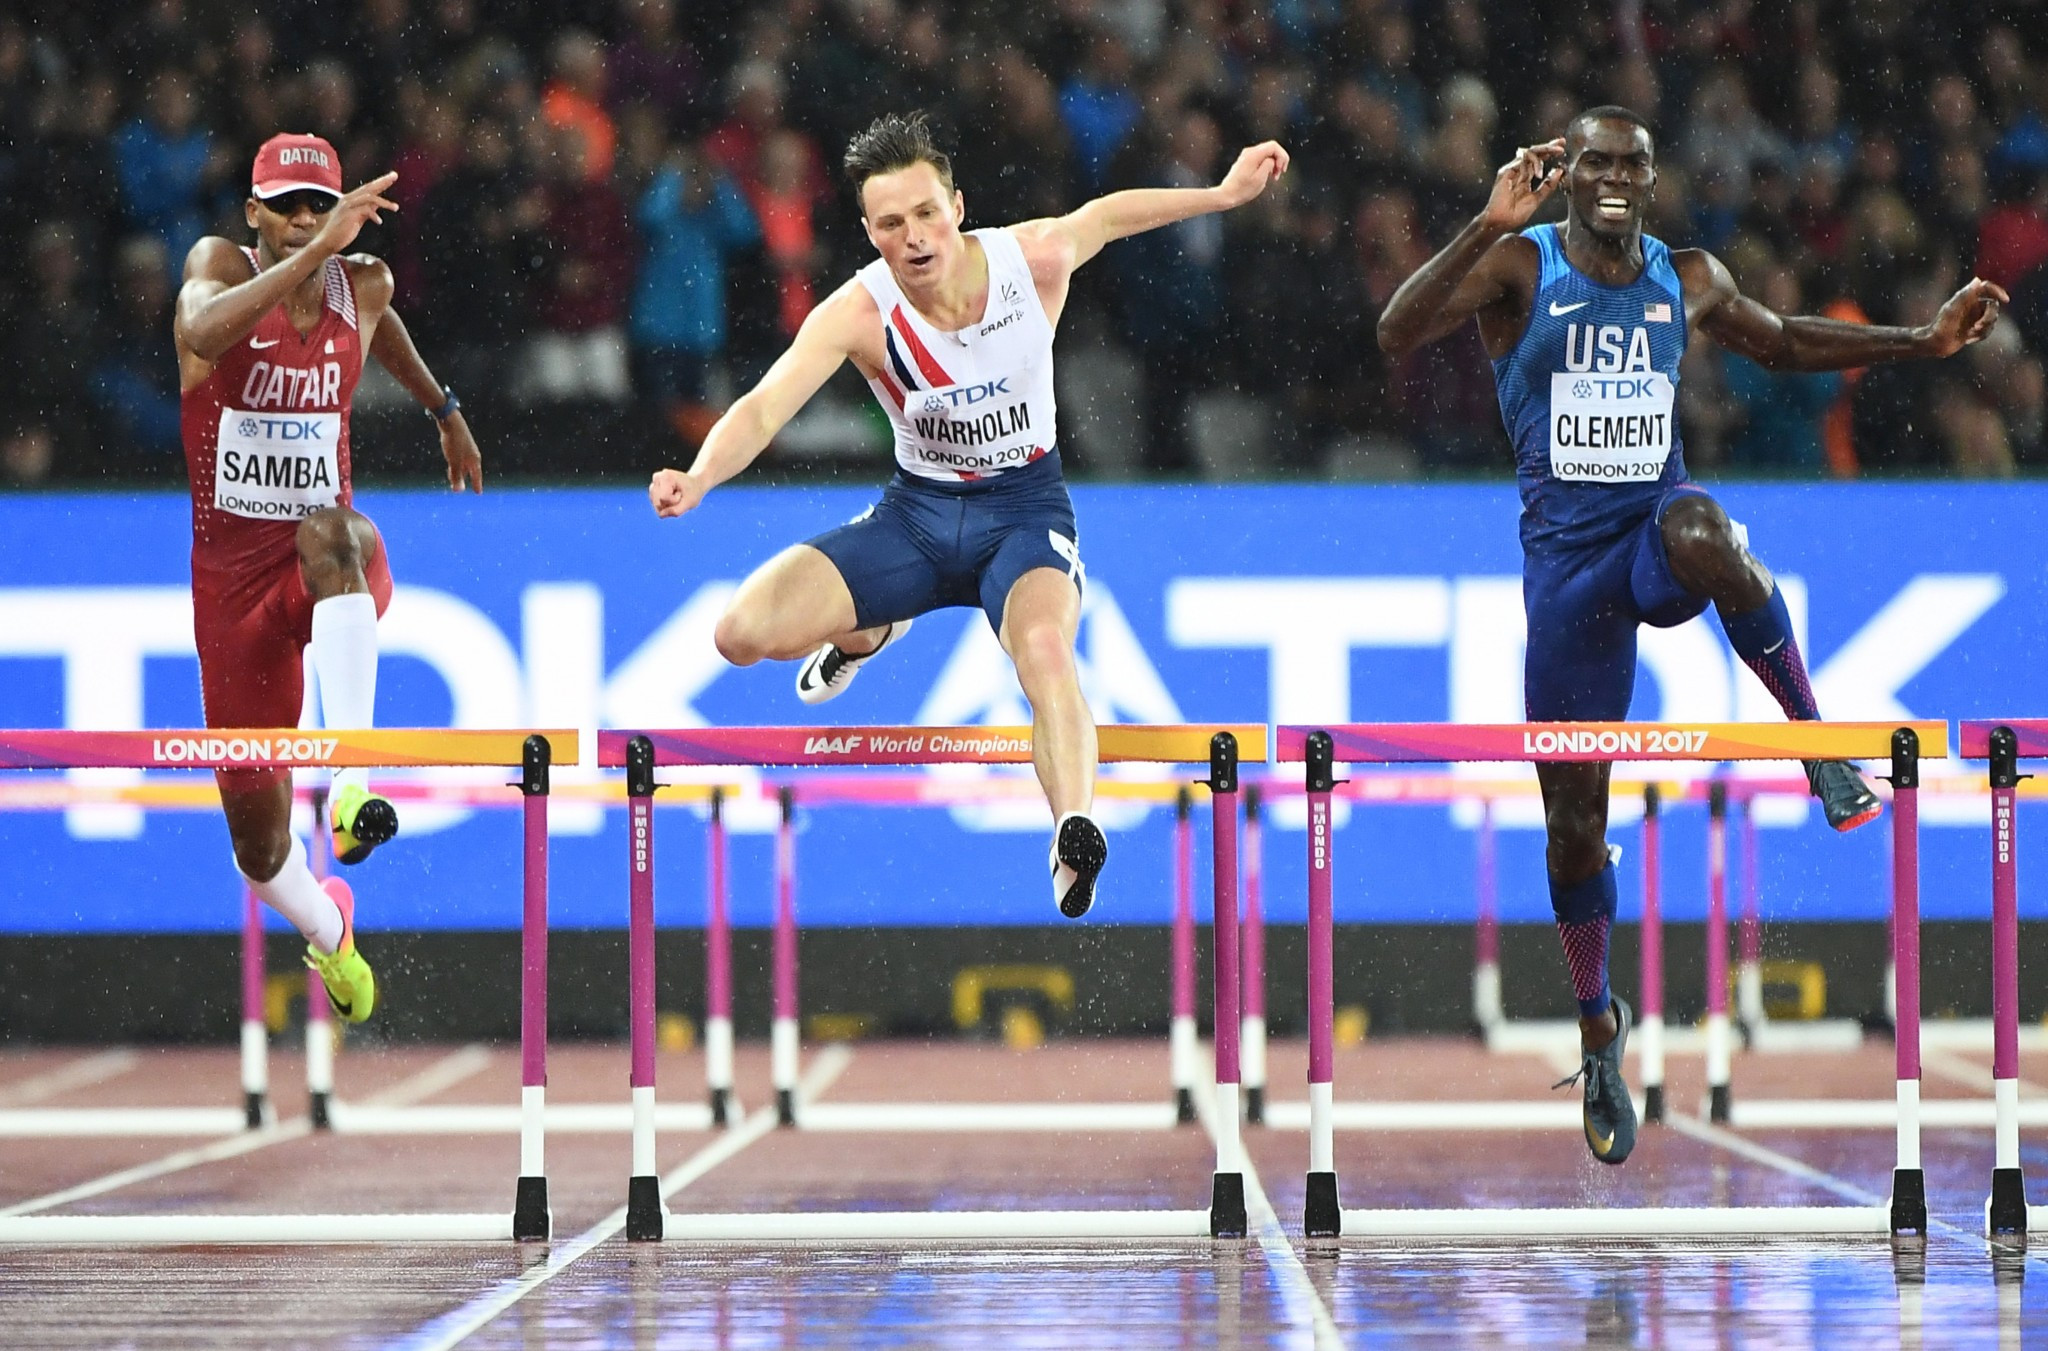 Karsten Warholm stunned the rest of the field to win the 400m hurdles title ©Getty Images